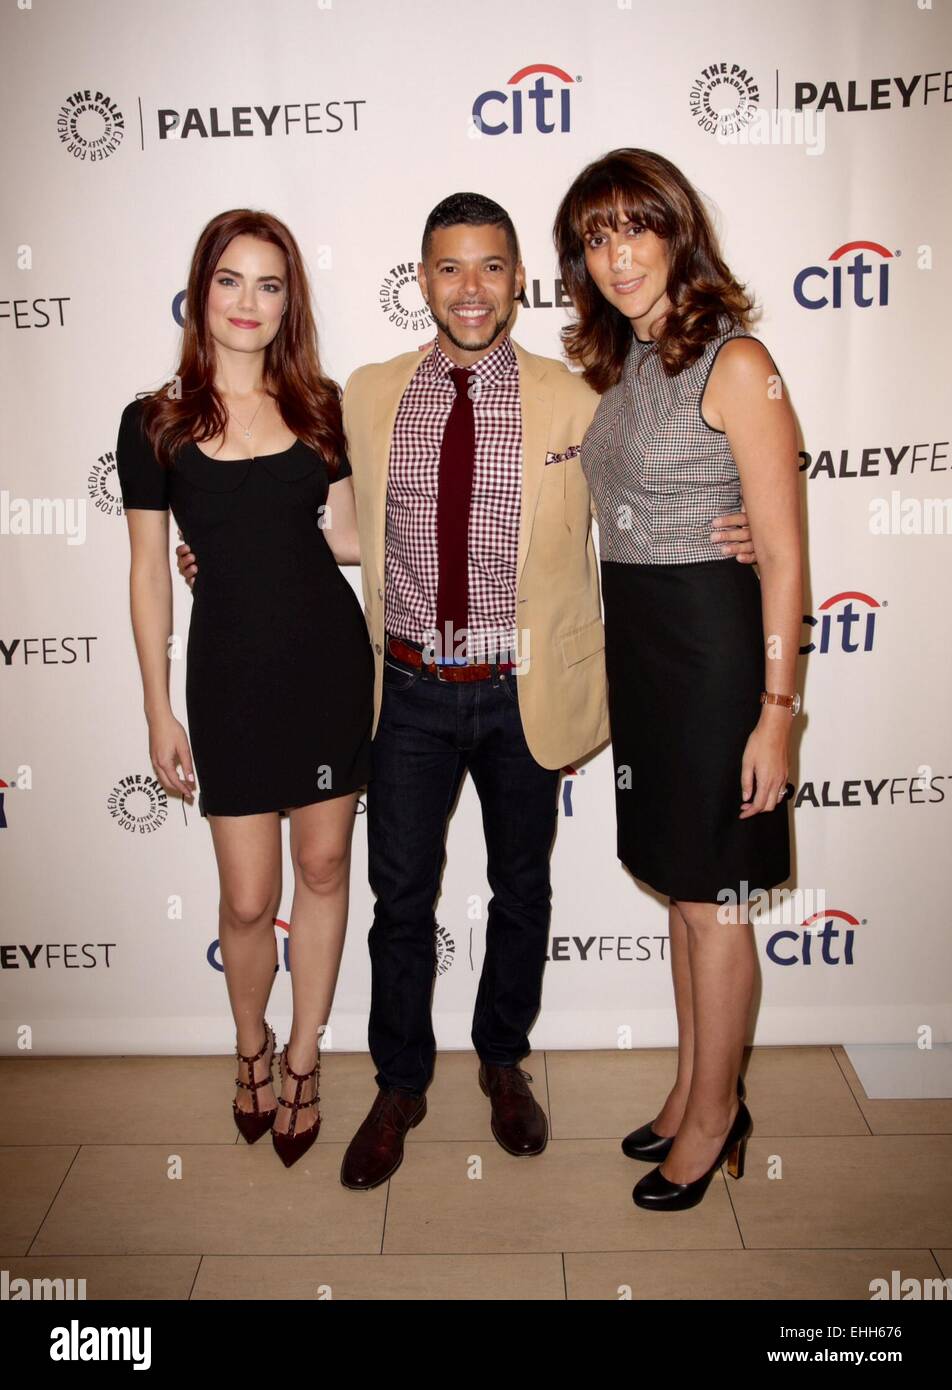 2014 PaleyFest preview panel - 'Red Band Society' - Arrivals Featuring: Rebecca  Rittenhouse,Wilson Cruz,Rina Mimoun Where: Los Angeles, California, United  States When: 08 Sep 2014 Stock Photo - Alamy